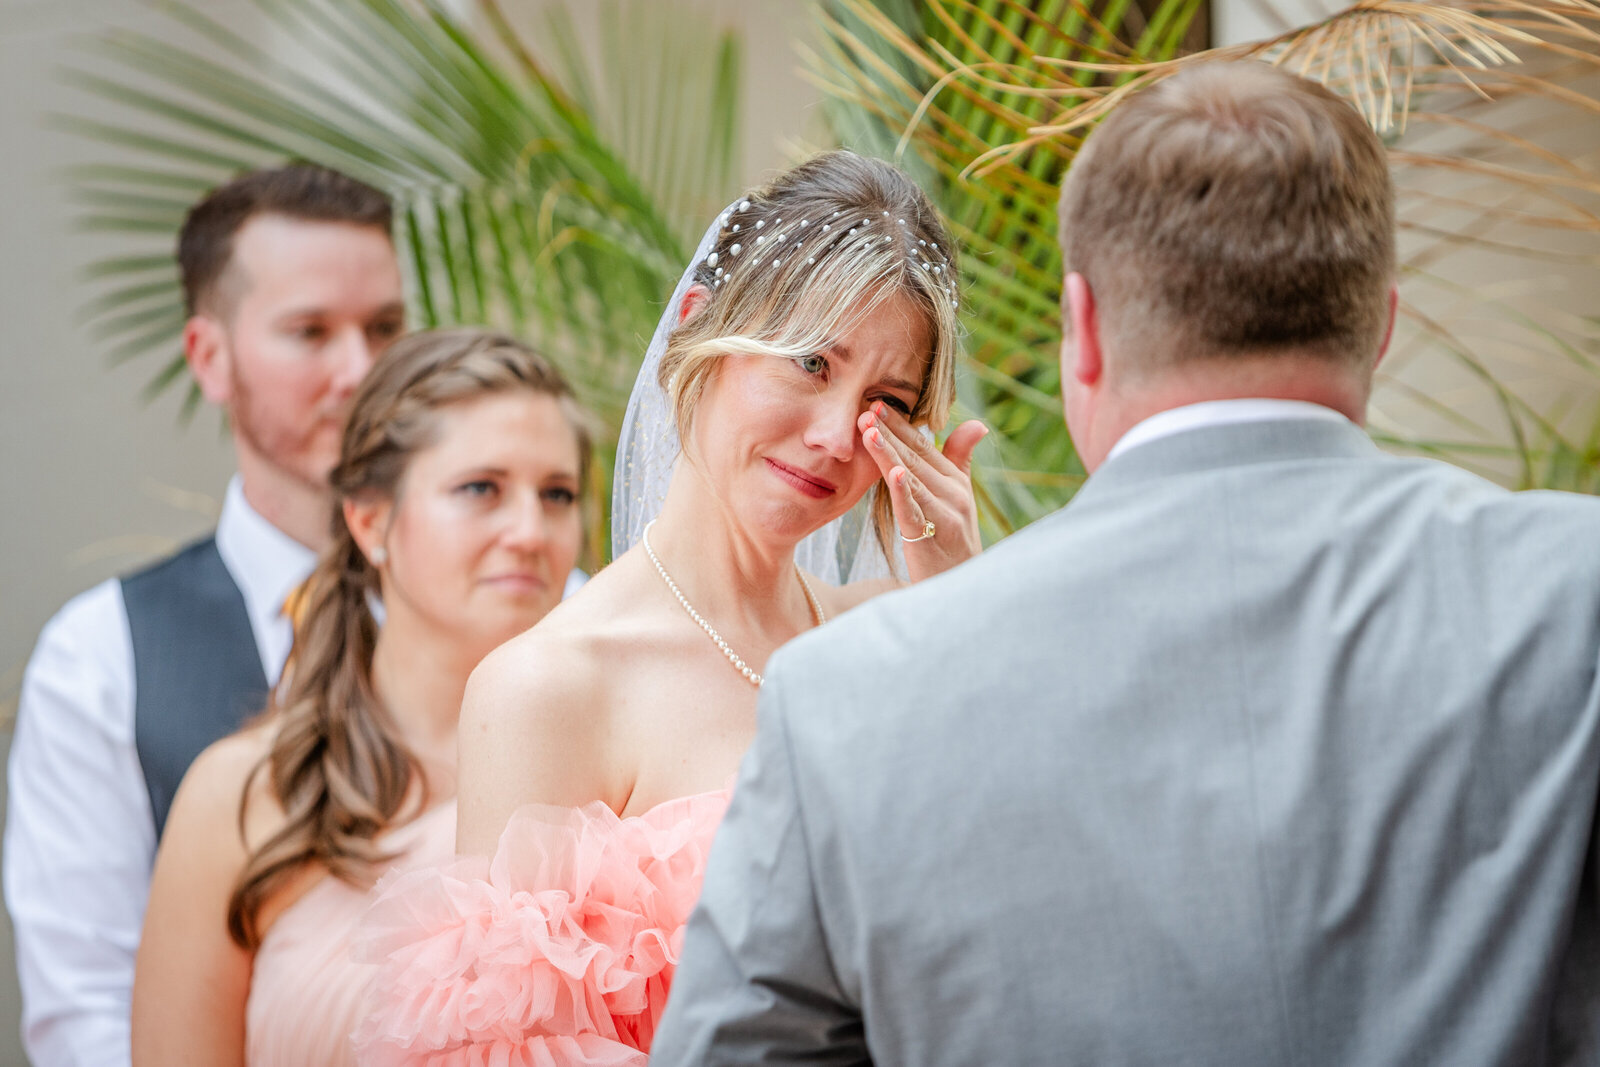 Bride wiping her tears during ceremony